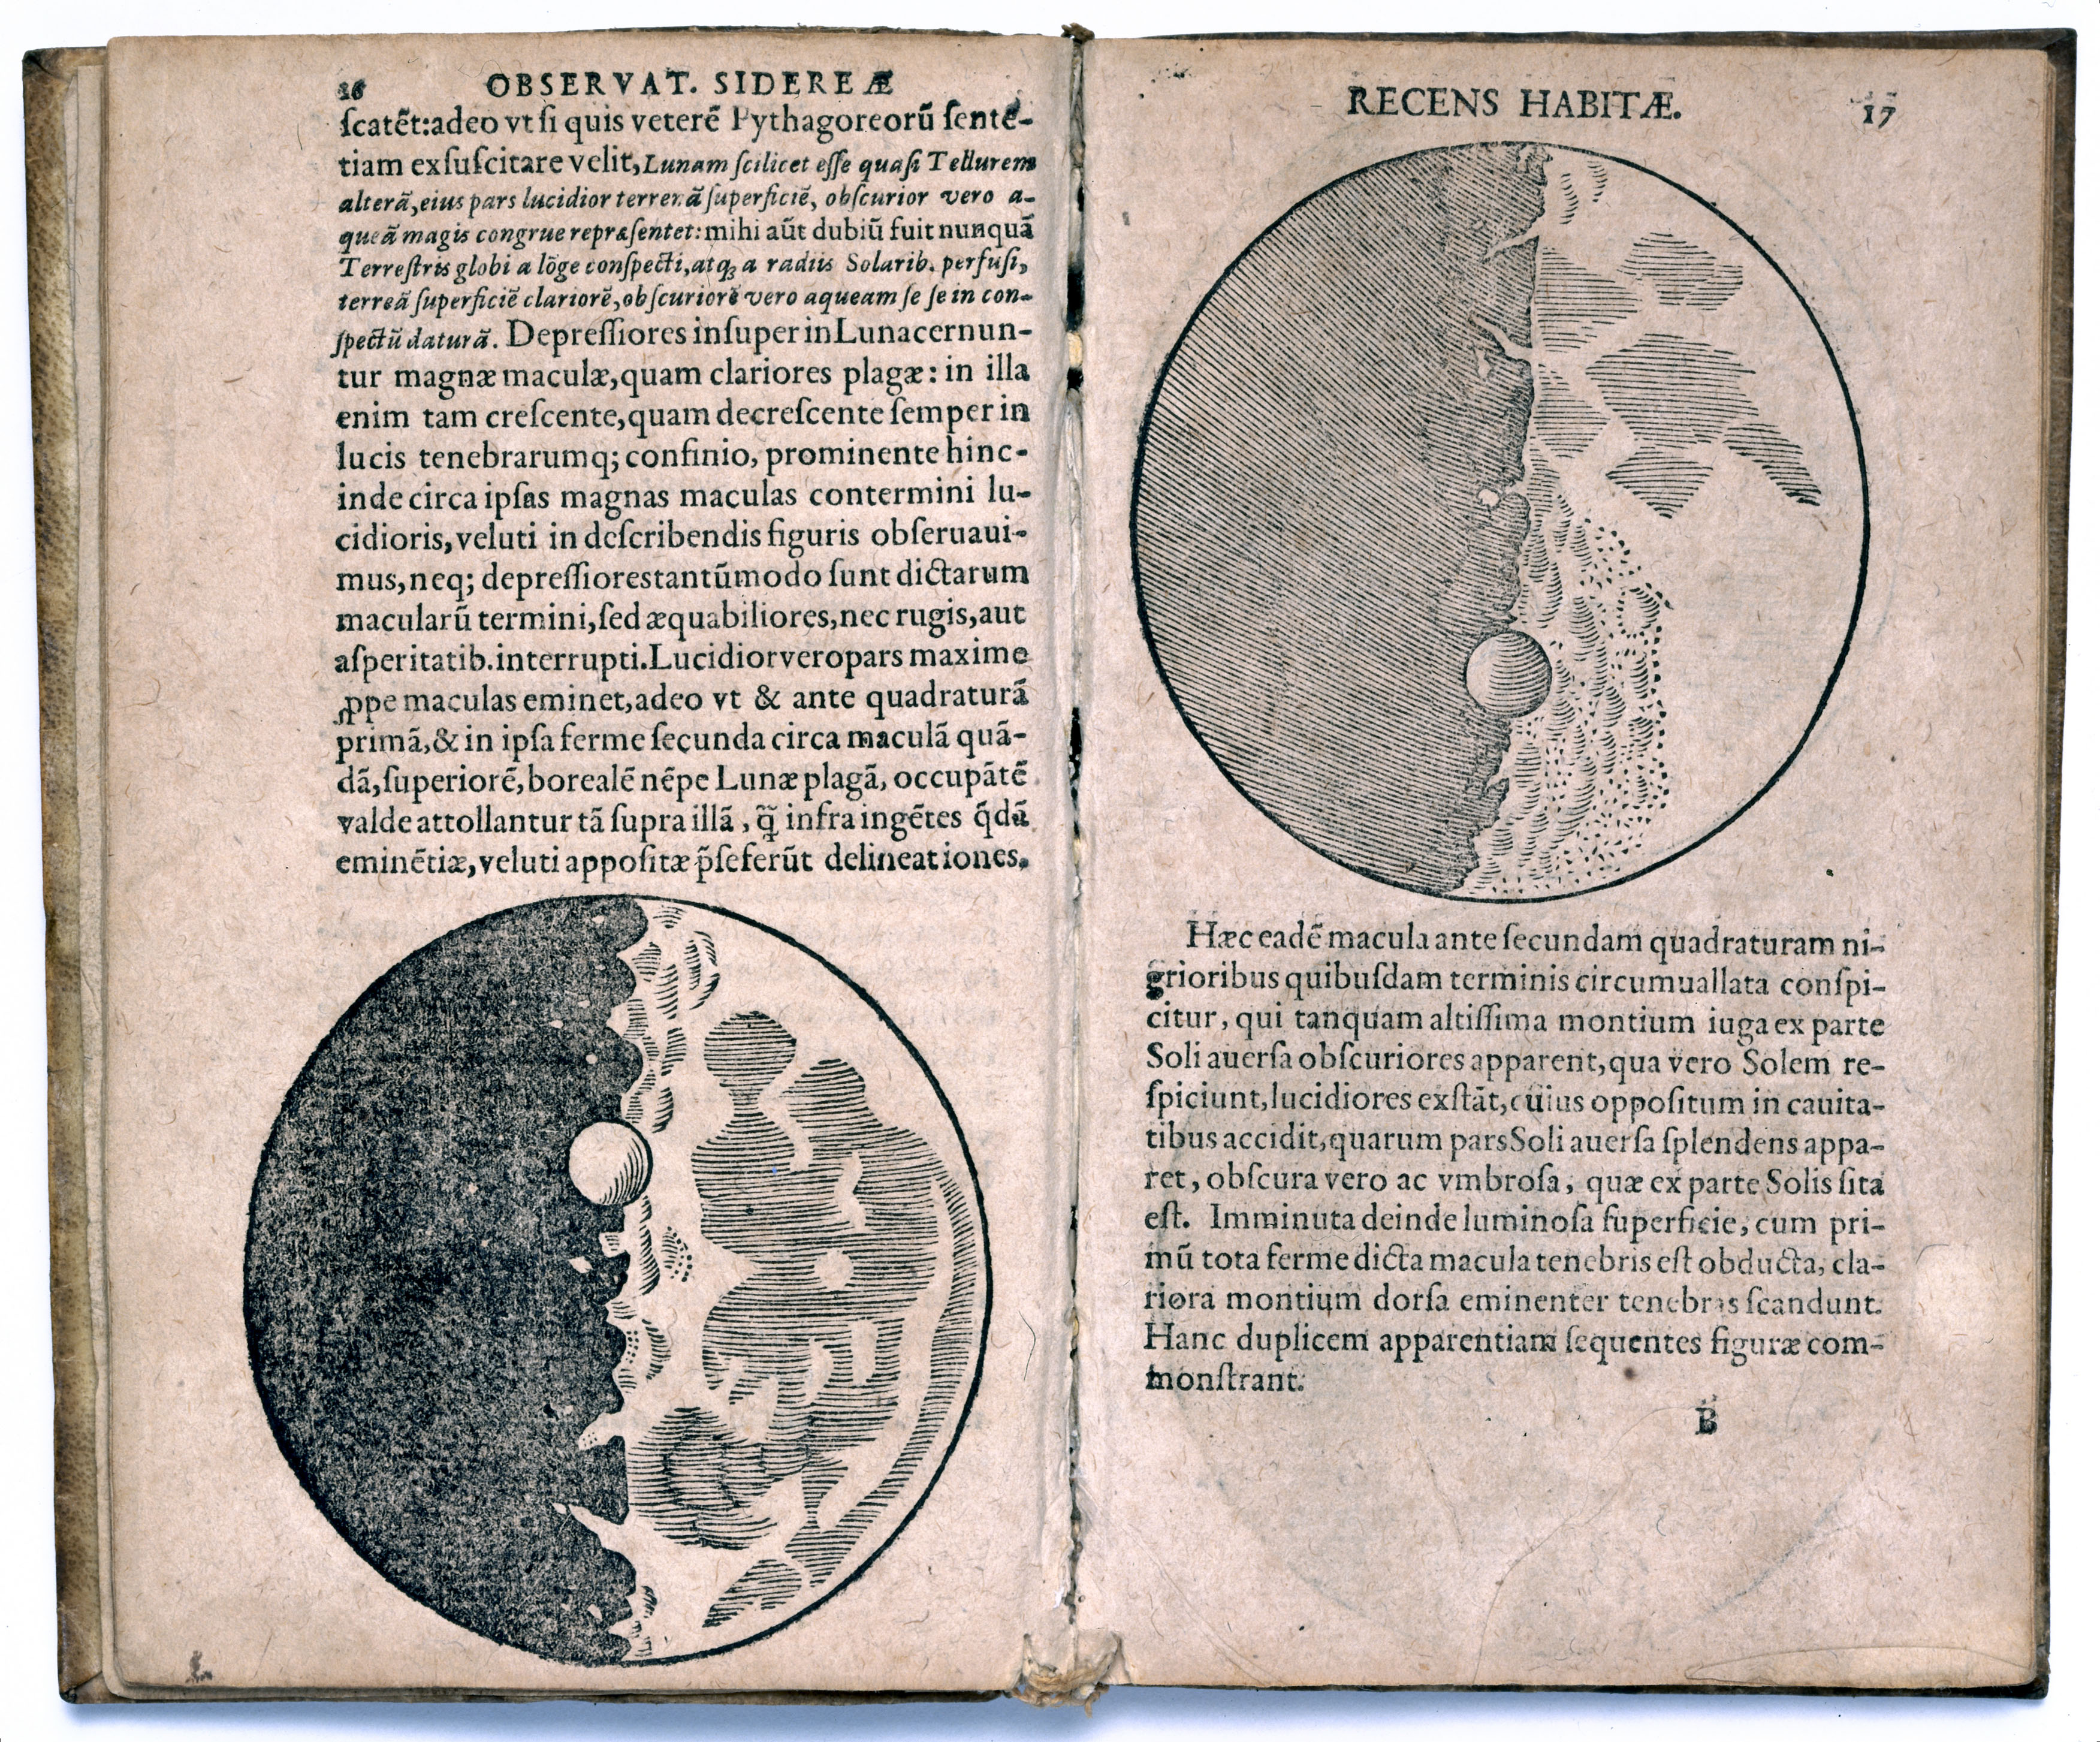 Pages from 'Sidereus, nuncius magna' (known as 'The Starry Messenger', Venice, 1610) by Galileo Galilei (1564-1642), a book of astronomical theory and observations. Galileo was an Italian astronomer and physicist and outstanding representative of the movement which transformed medieval natural philosophy into modern science. (Science & Society Picture Library—SSPL via Getty Images)